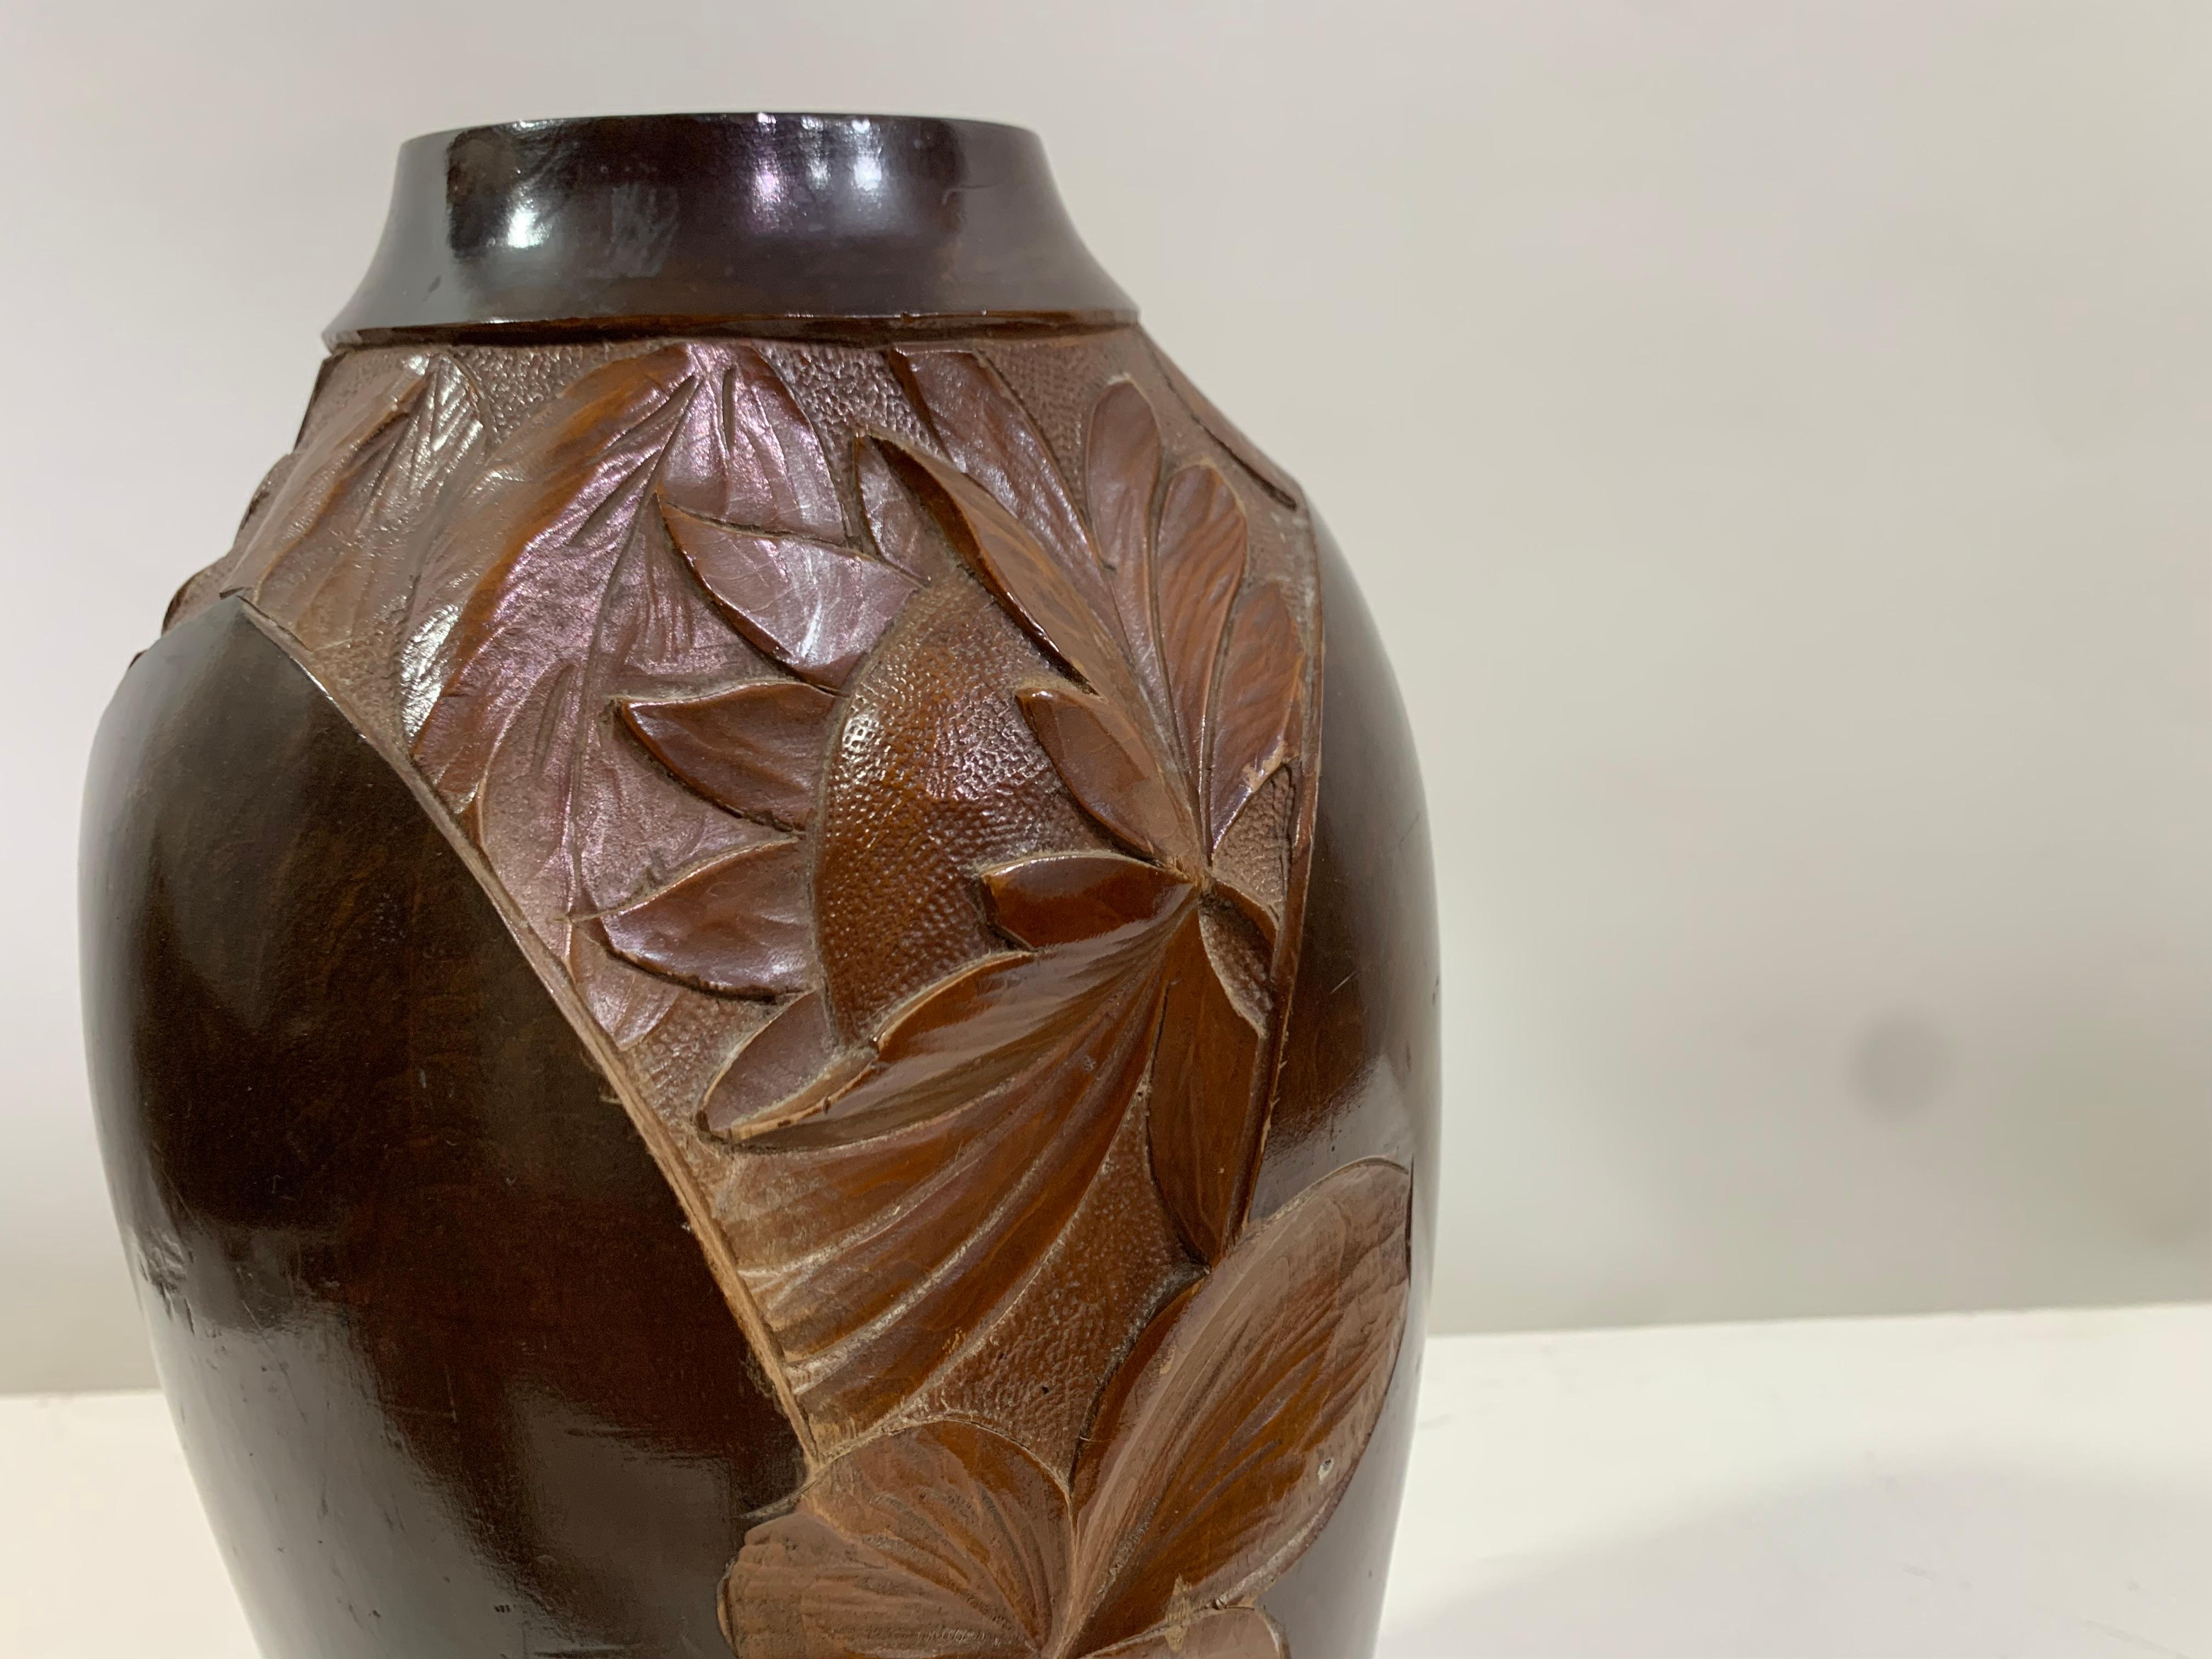 Vintage handmade wooden vase signed Dupia, depicting flowers.

This unique piece stands as a testament to the timeless appeal of handmade artistry. It seamlessly marries the vintage charm of the past with the allure of today's interiors, making it a